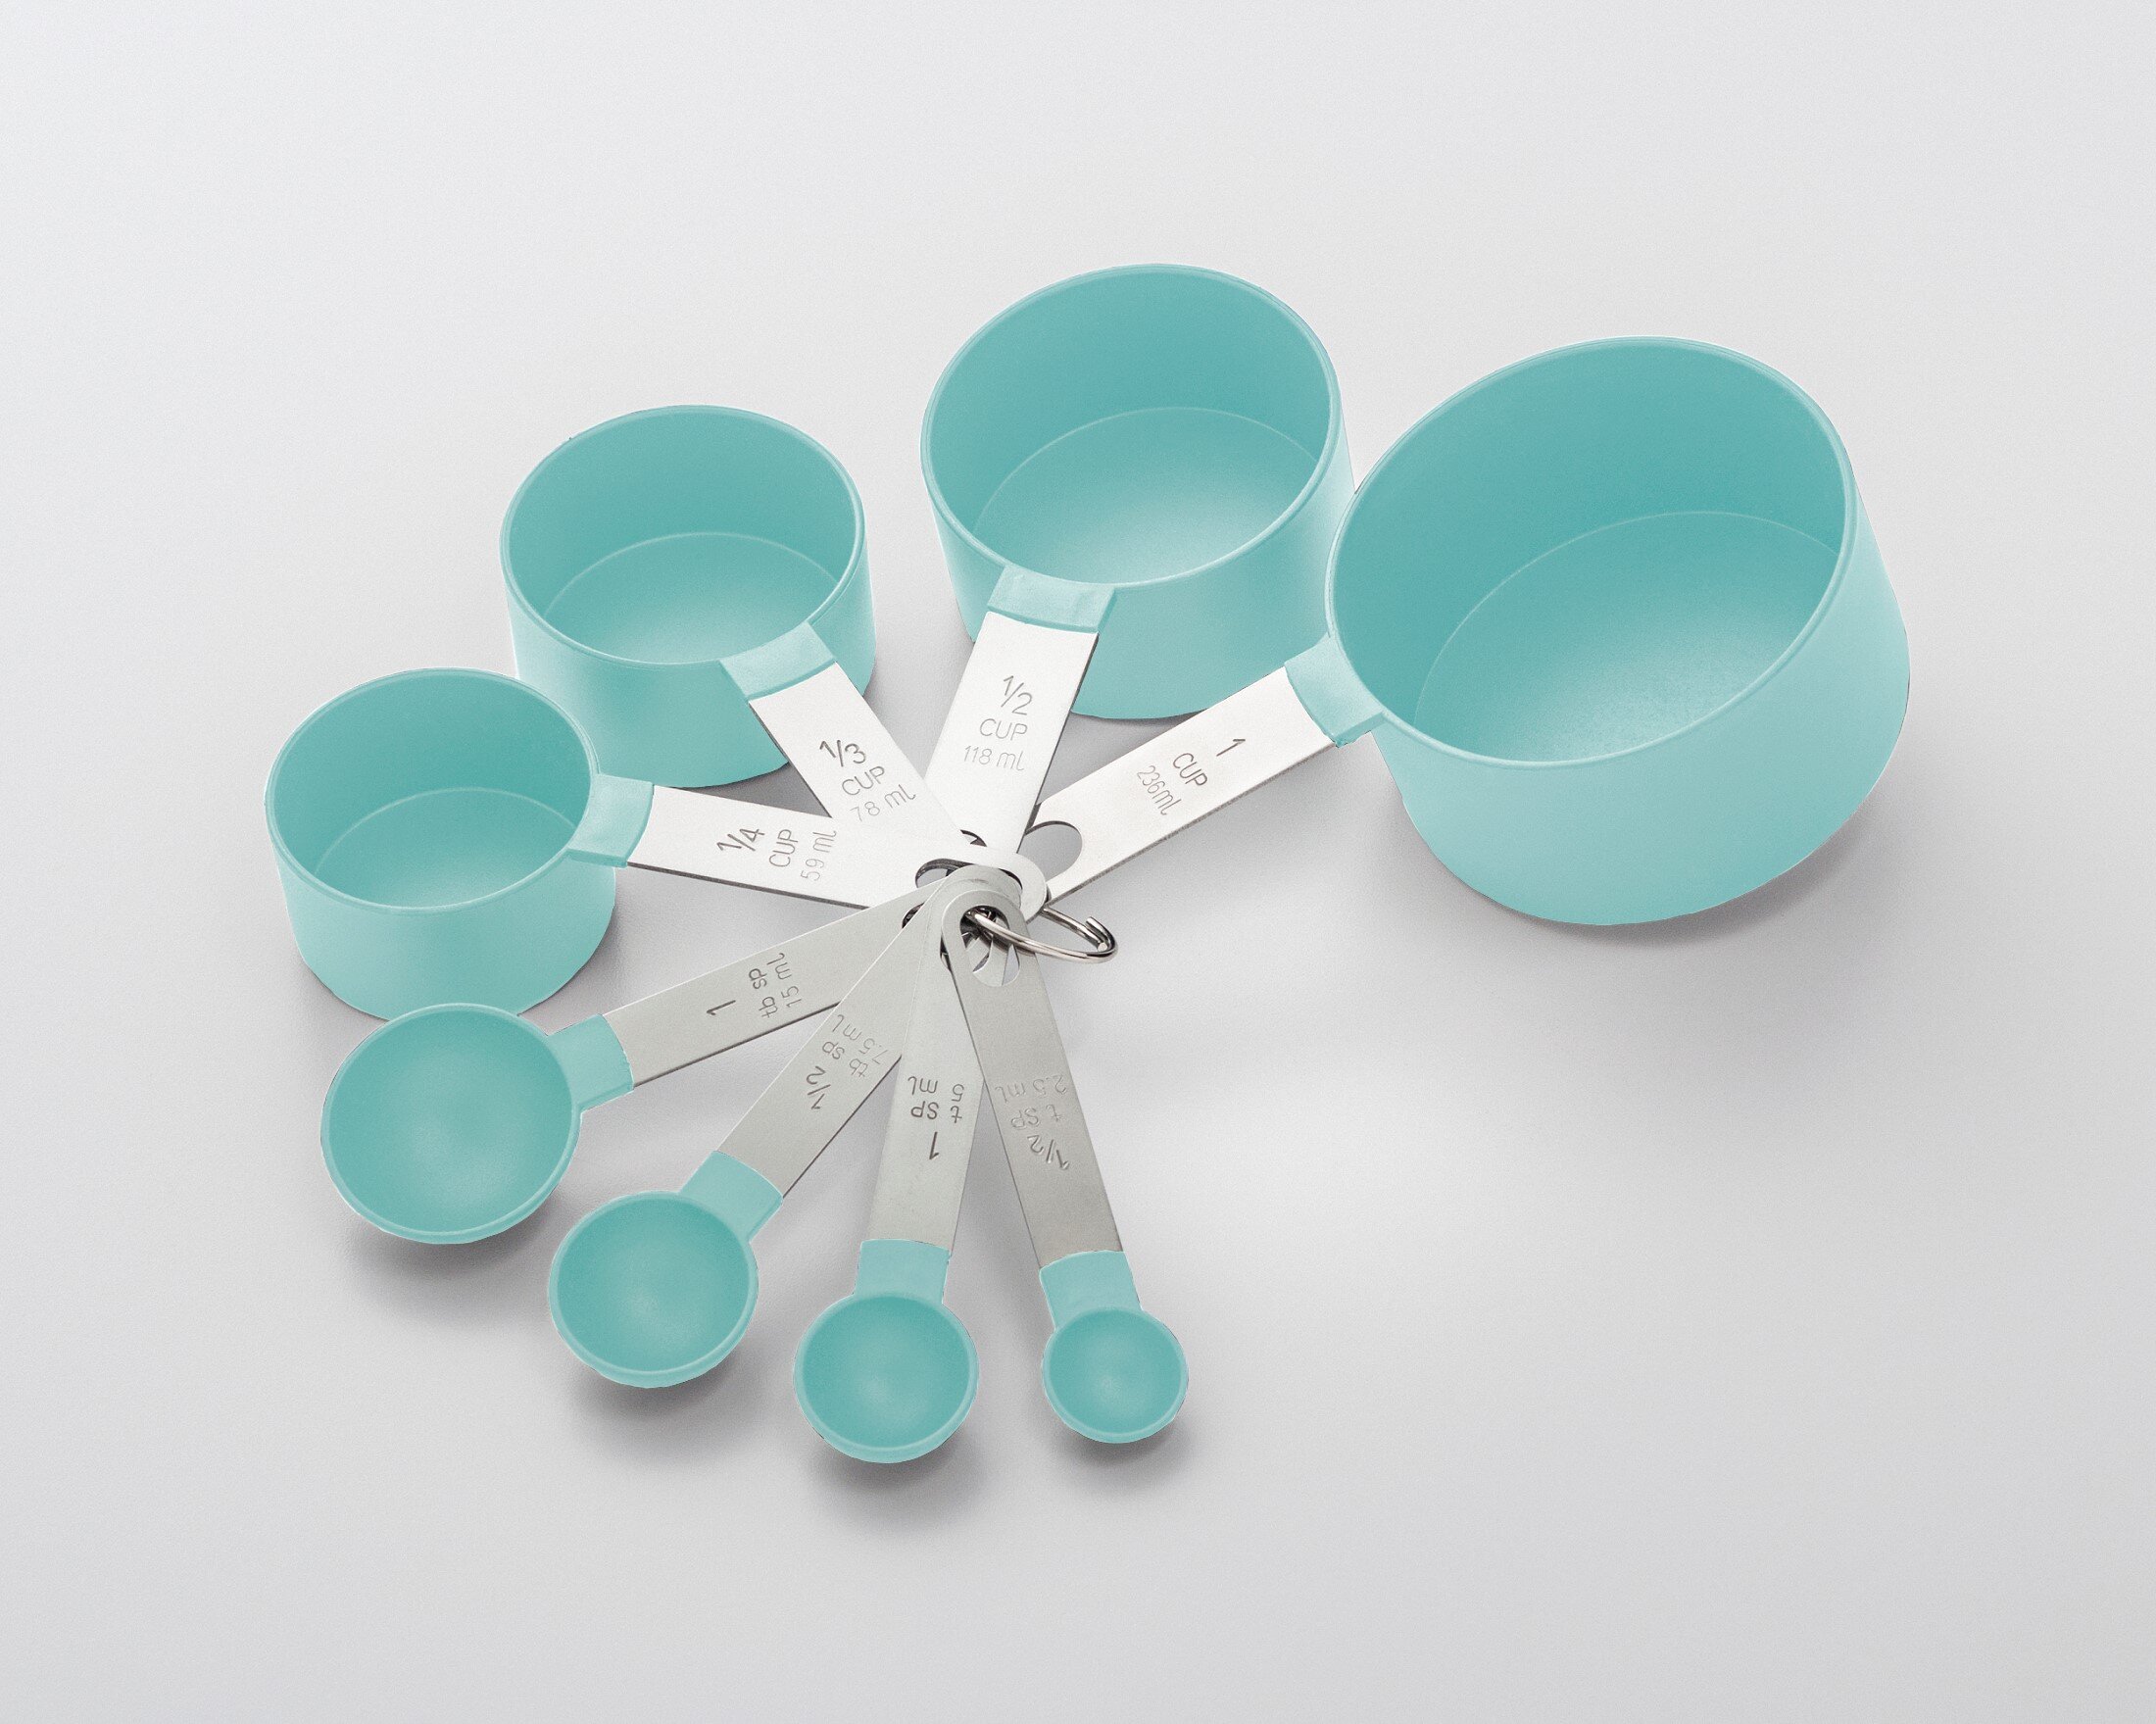 Cooks on Fire 8-Piece Measuring Cup and Spoon Set (Set of 8) Cooks on Fire Color: Green